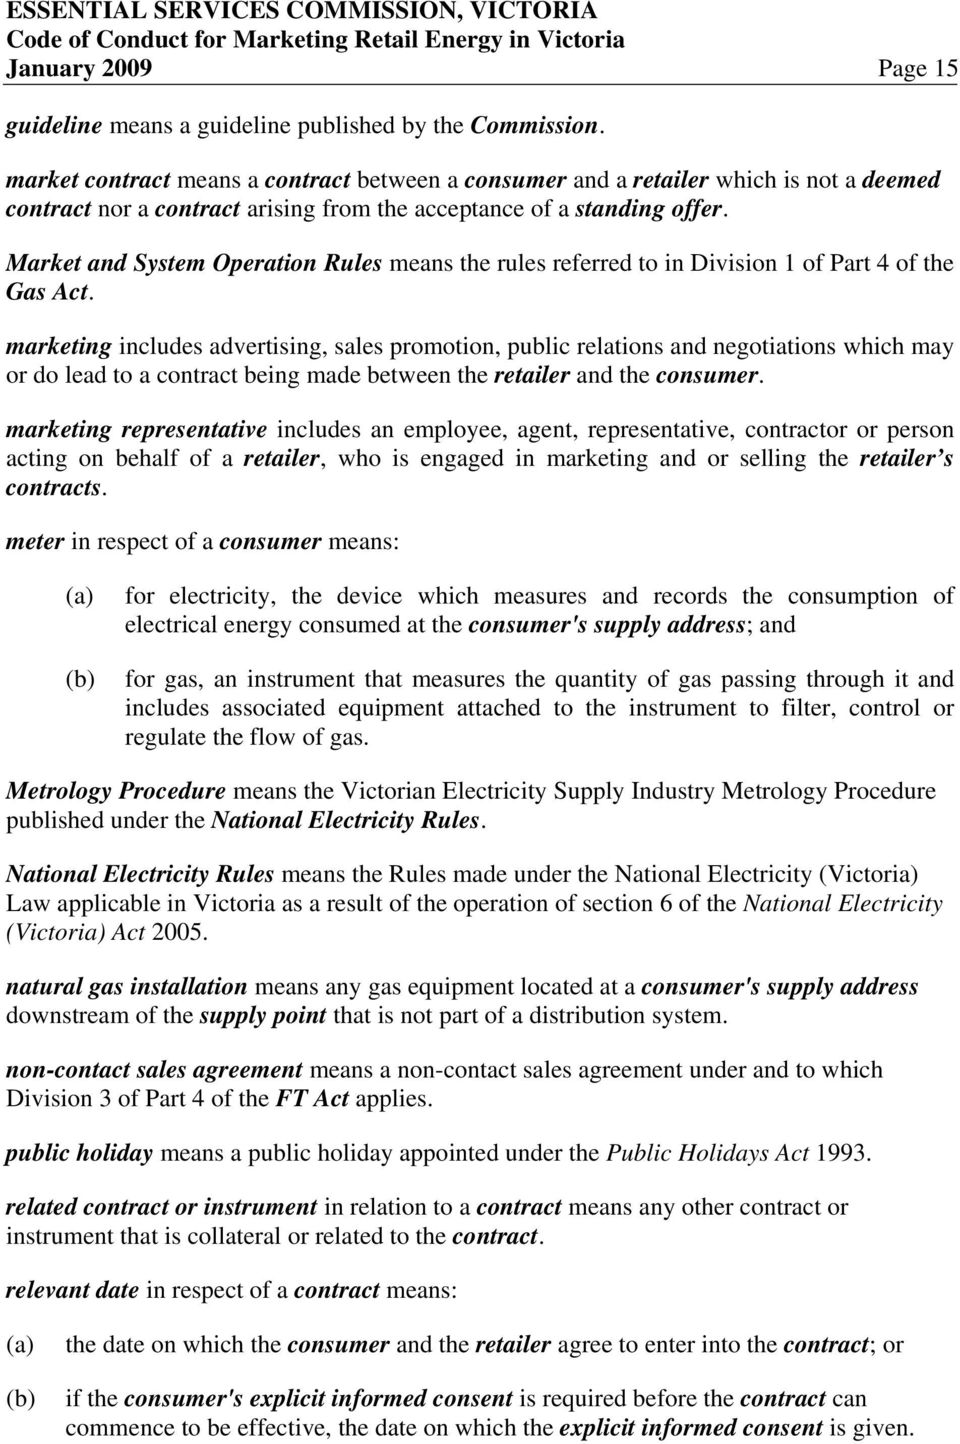 Market and System Operation Rules means the rules referred to in Division 1 of Part 4 of the Gas Act.